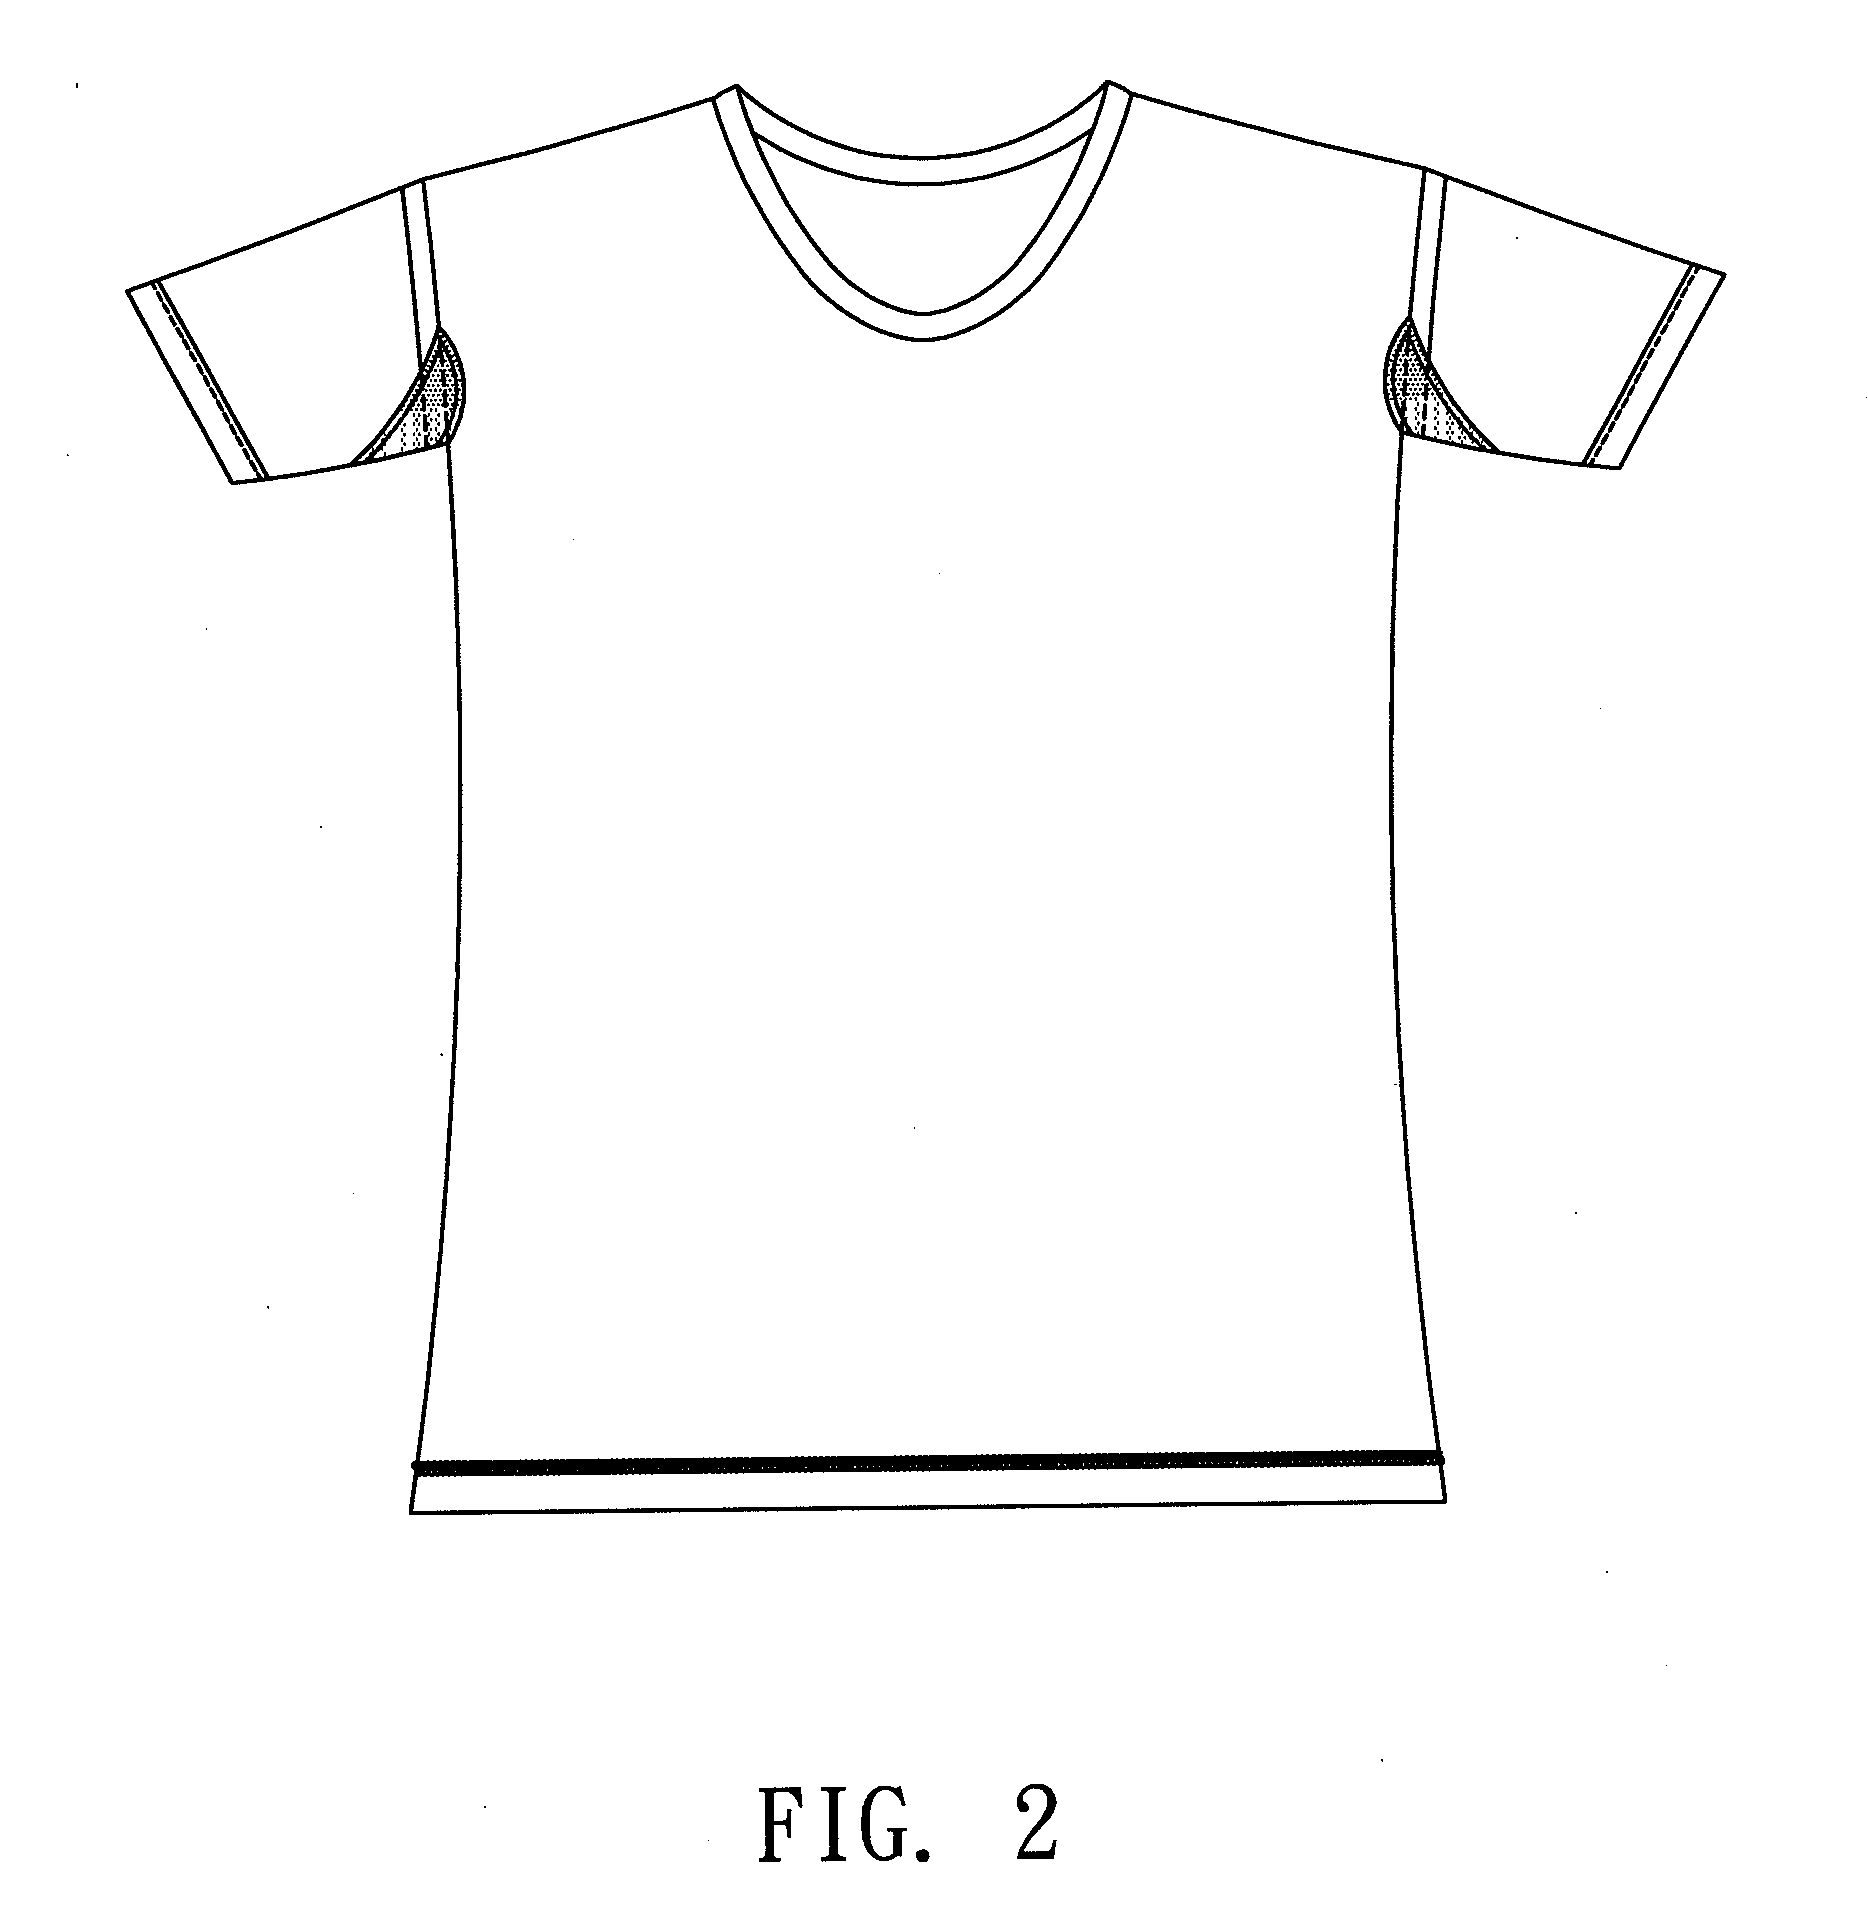 Clothing structure